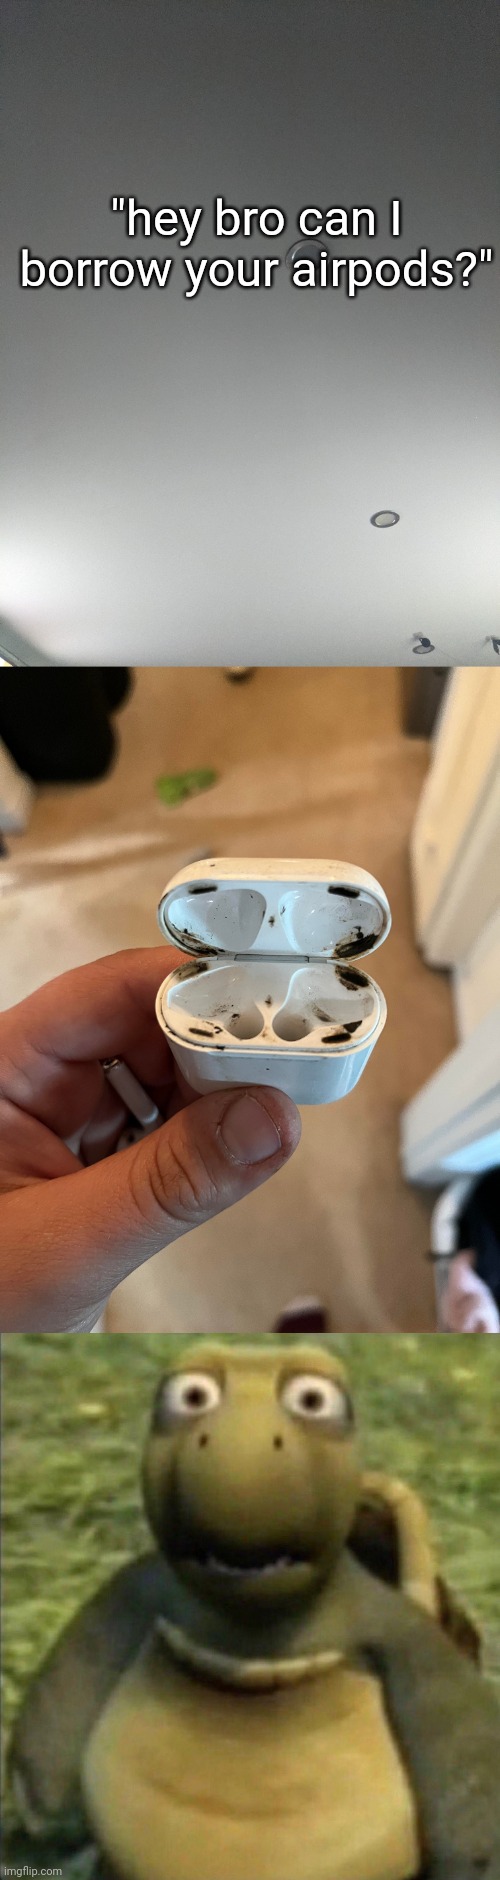 Like.. | "hey bro can I borrow your airpods?" | image tagged in airpods,frontpage,funny | made w/ Imgflip meme maker